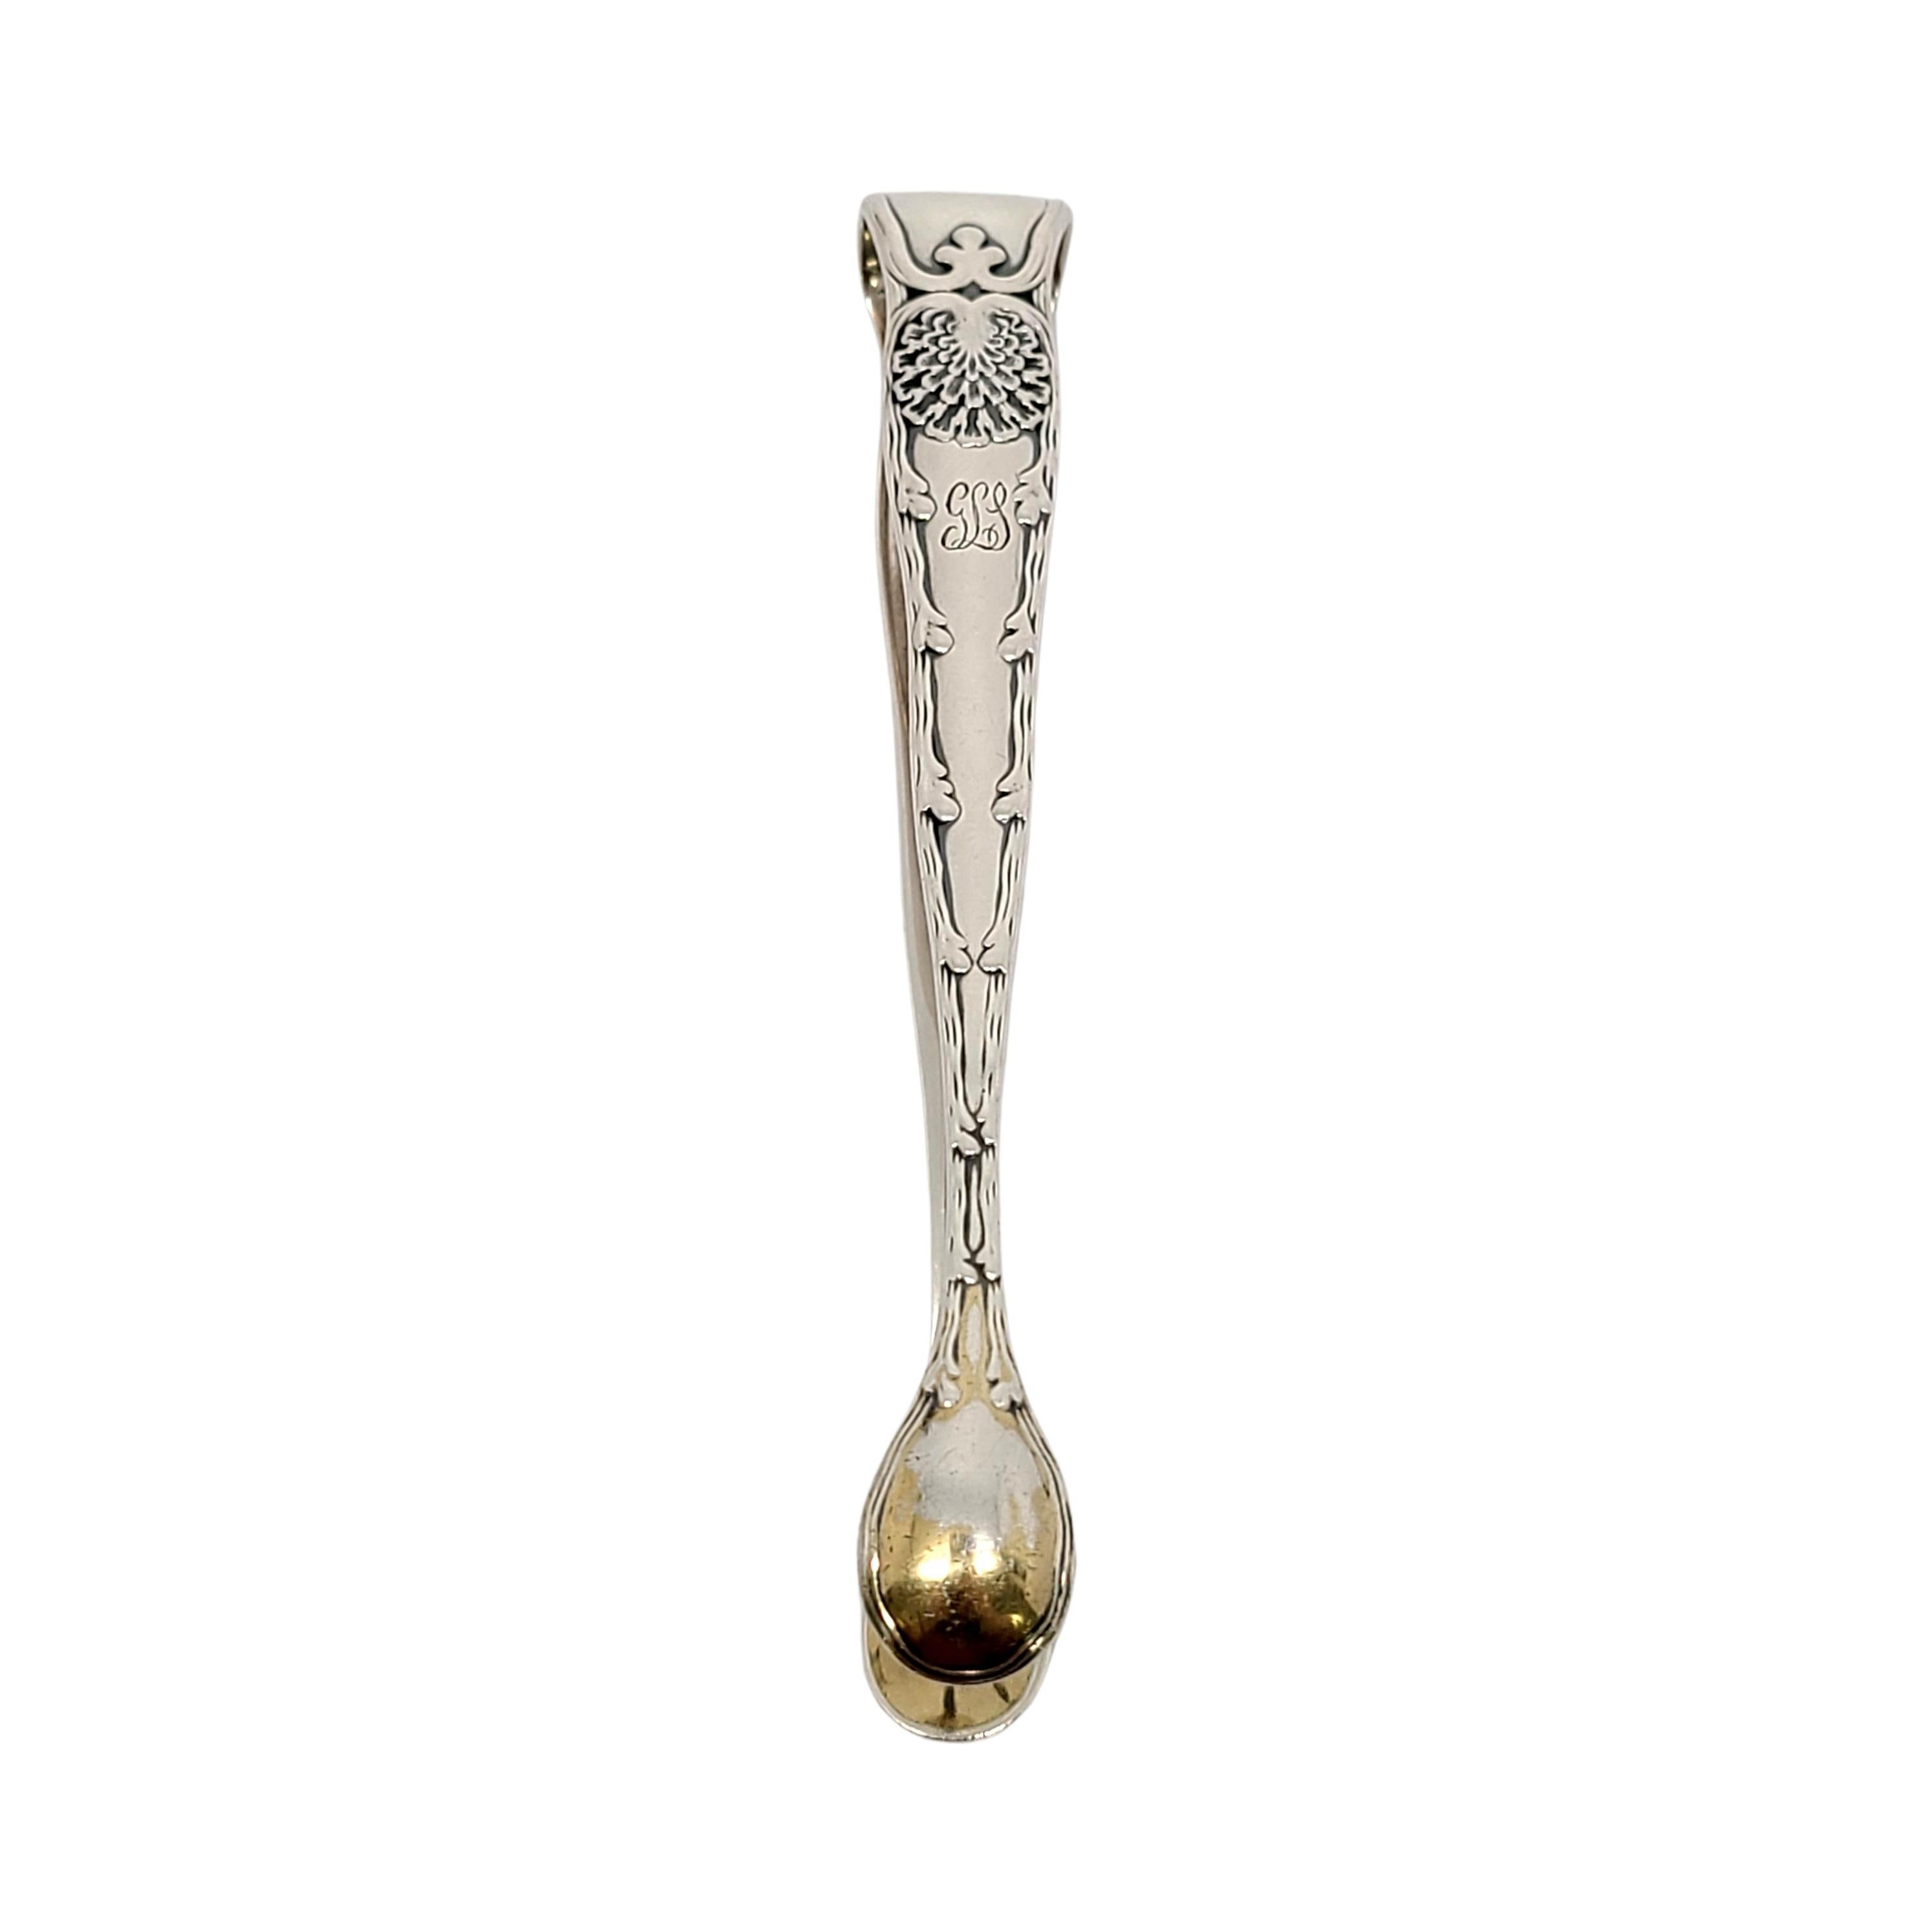 Sterling silver sugar tongs with gold washed shell tips by Tiffany & Co in the Wave Edge pattern.

Monogram appears to be GLS

The Wave Edge pattern is a marine motif designed by Charles T. Grosjean. This piece features small shell gold washed tips.